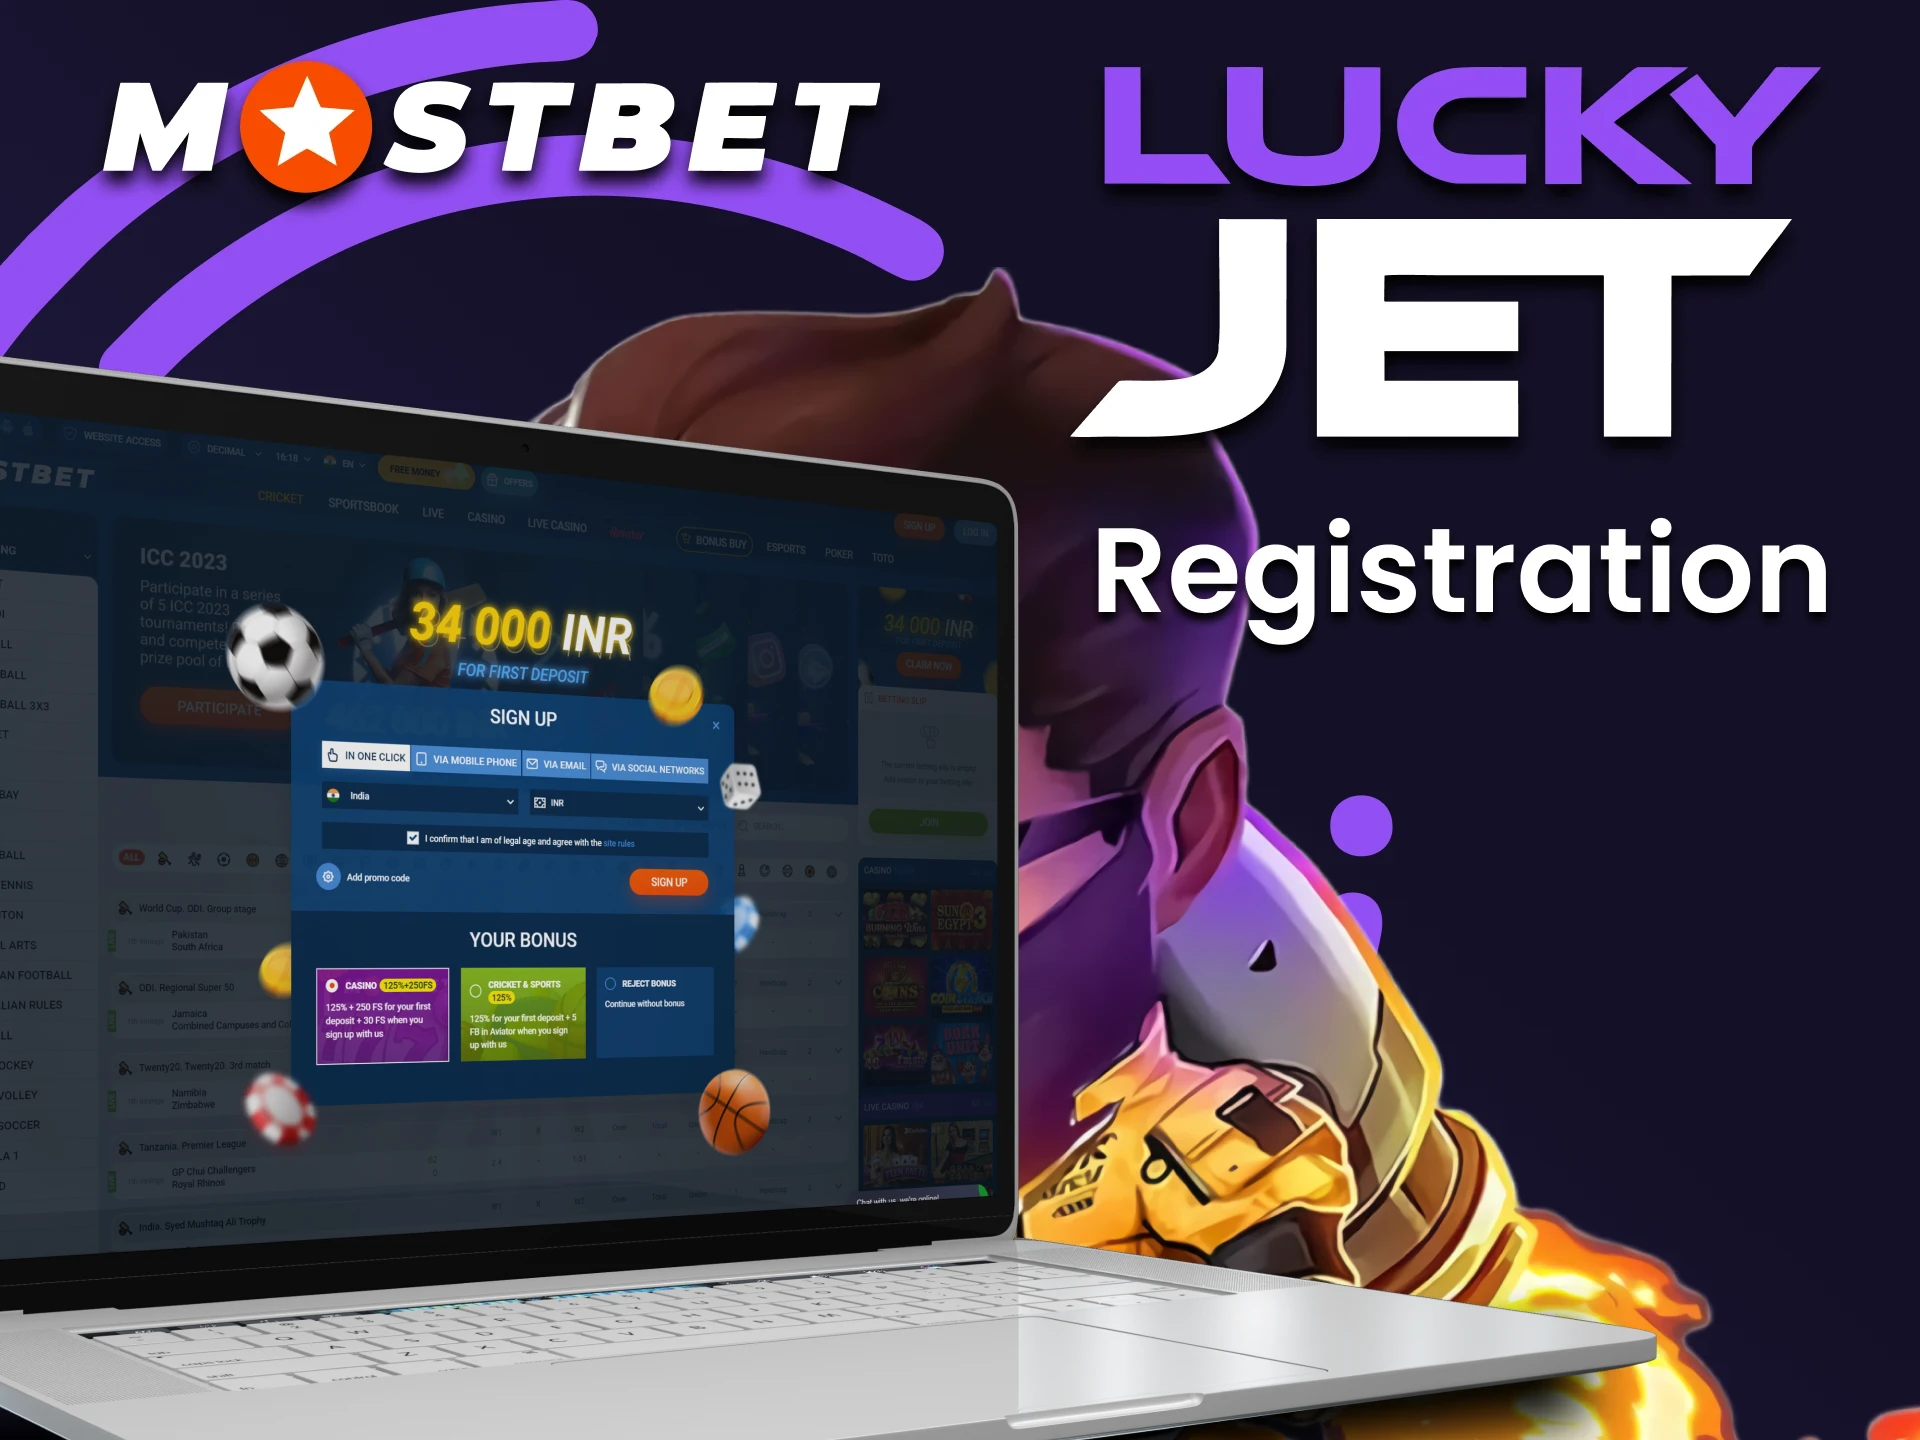 Creating a personal Mostbet account will give you the opportunity to play Lucky Jet.